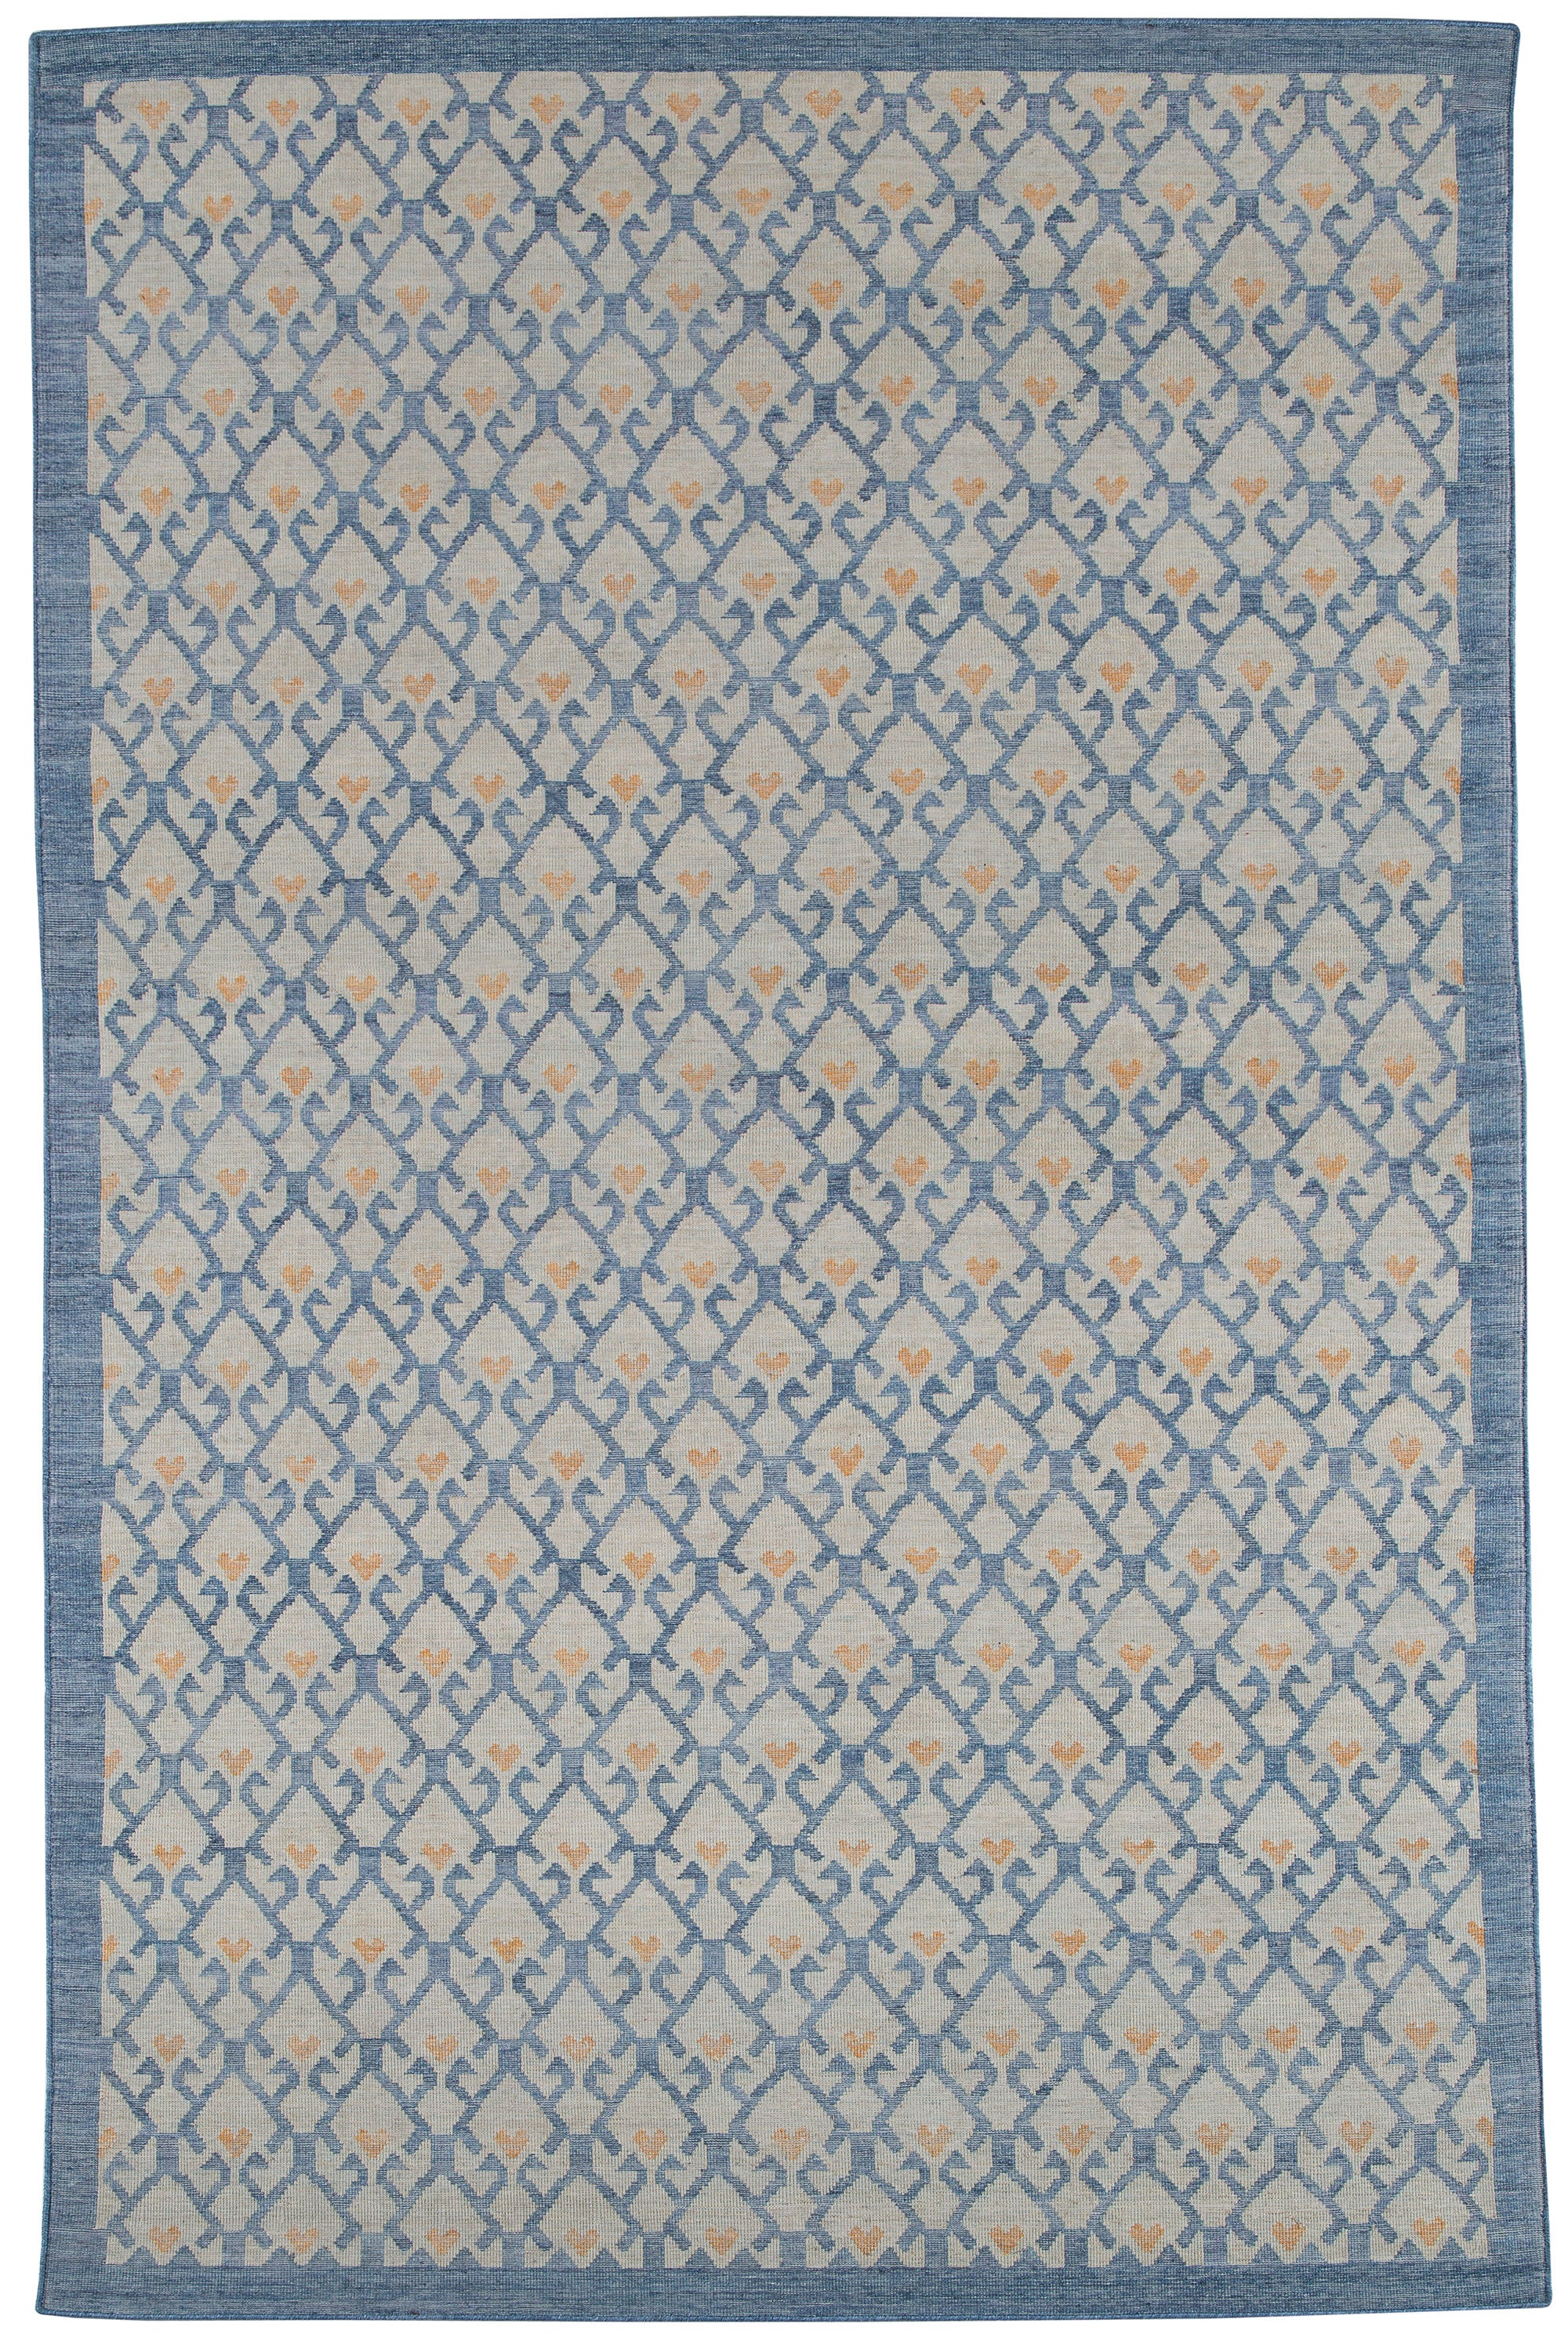 Full size Avesta Rug in Blue, a blue lattice pattern on a beige field with small orange heart accents. 